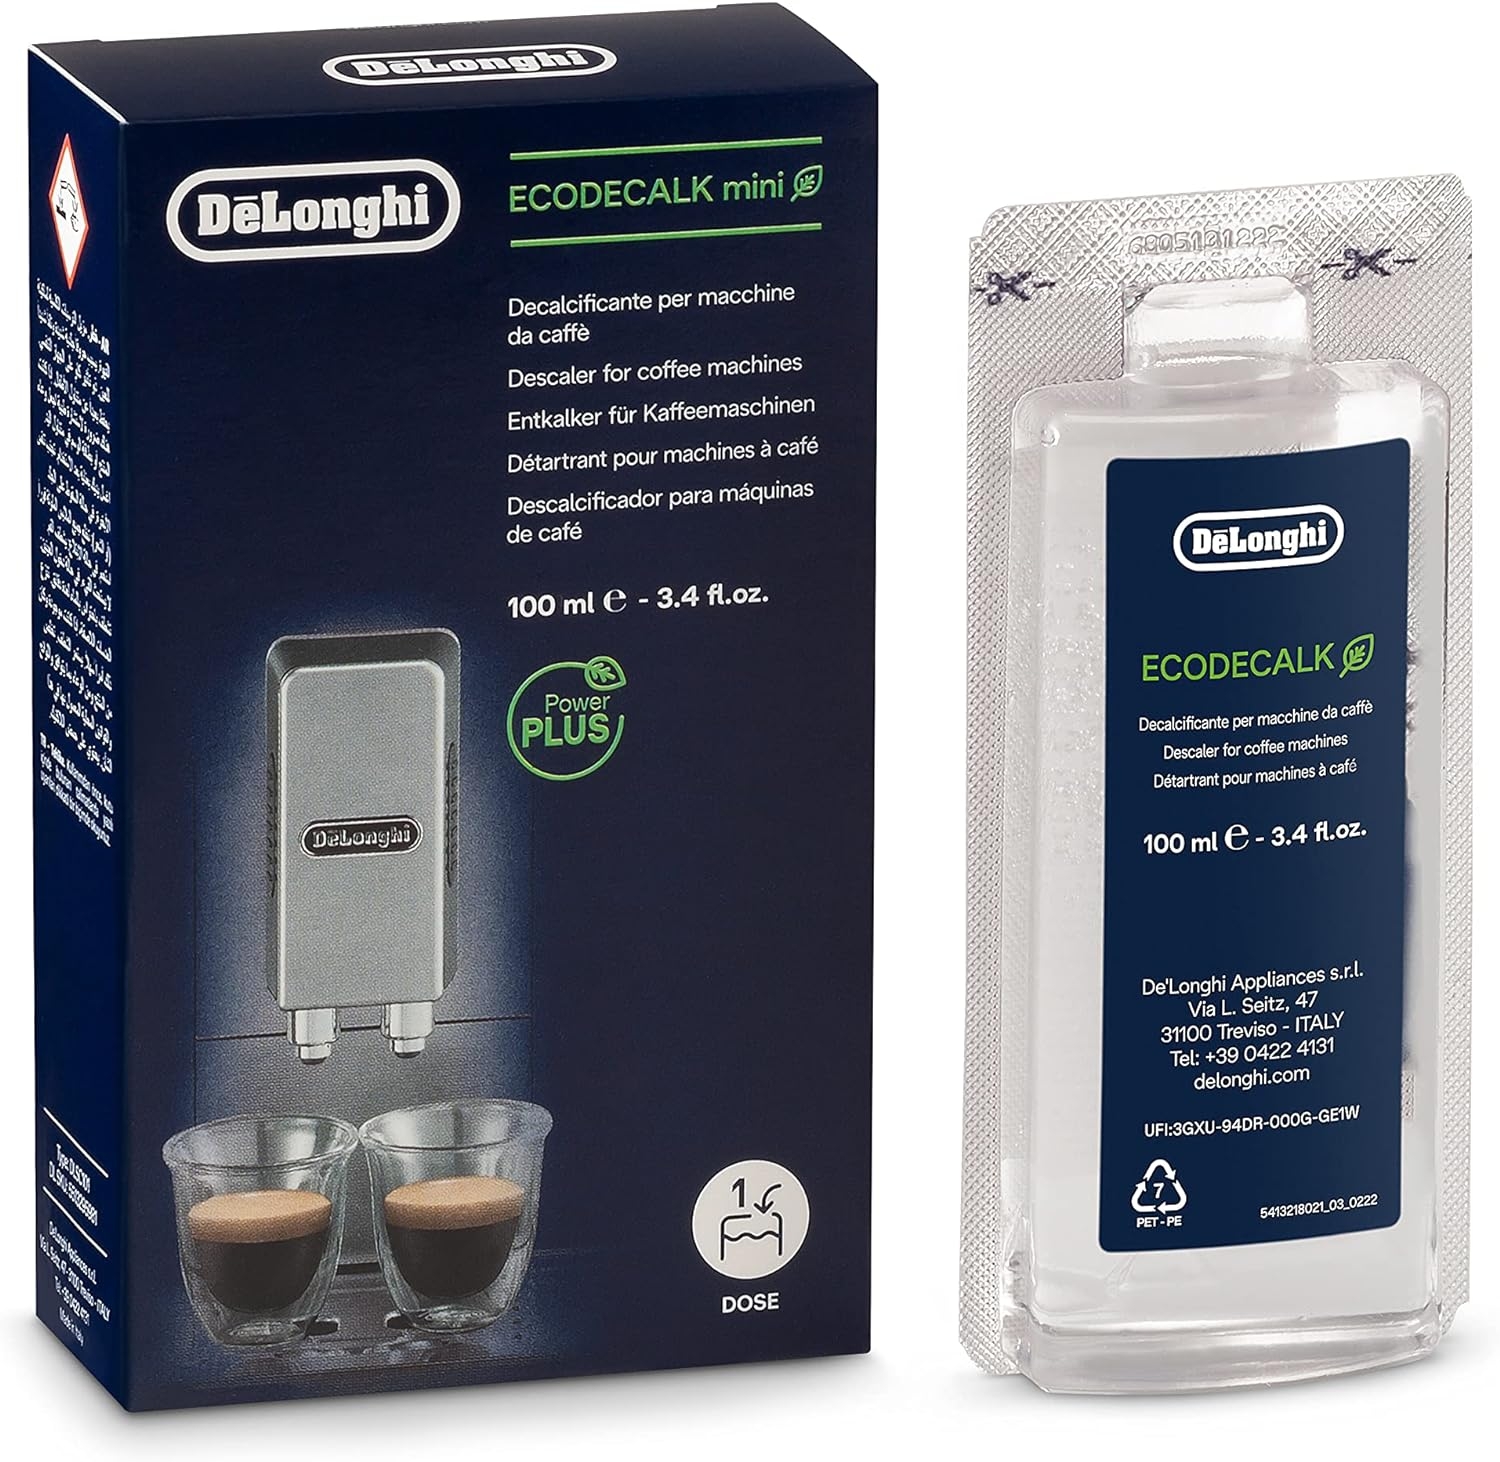 Delonghi EcoDecalk 500 ml. Decalcifier for coffee maker